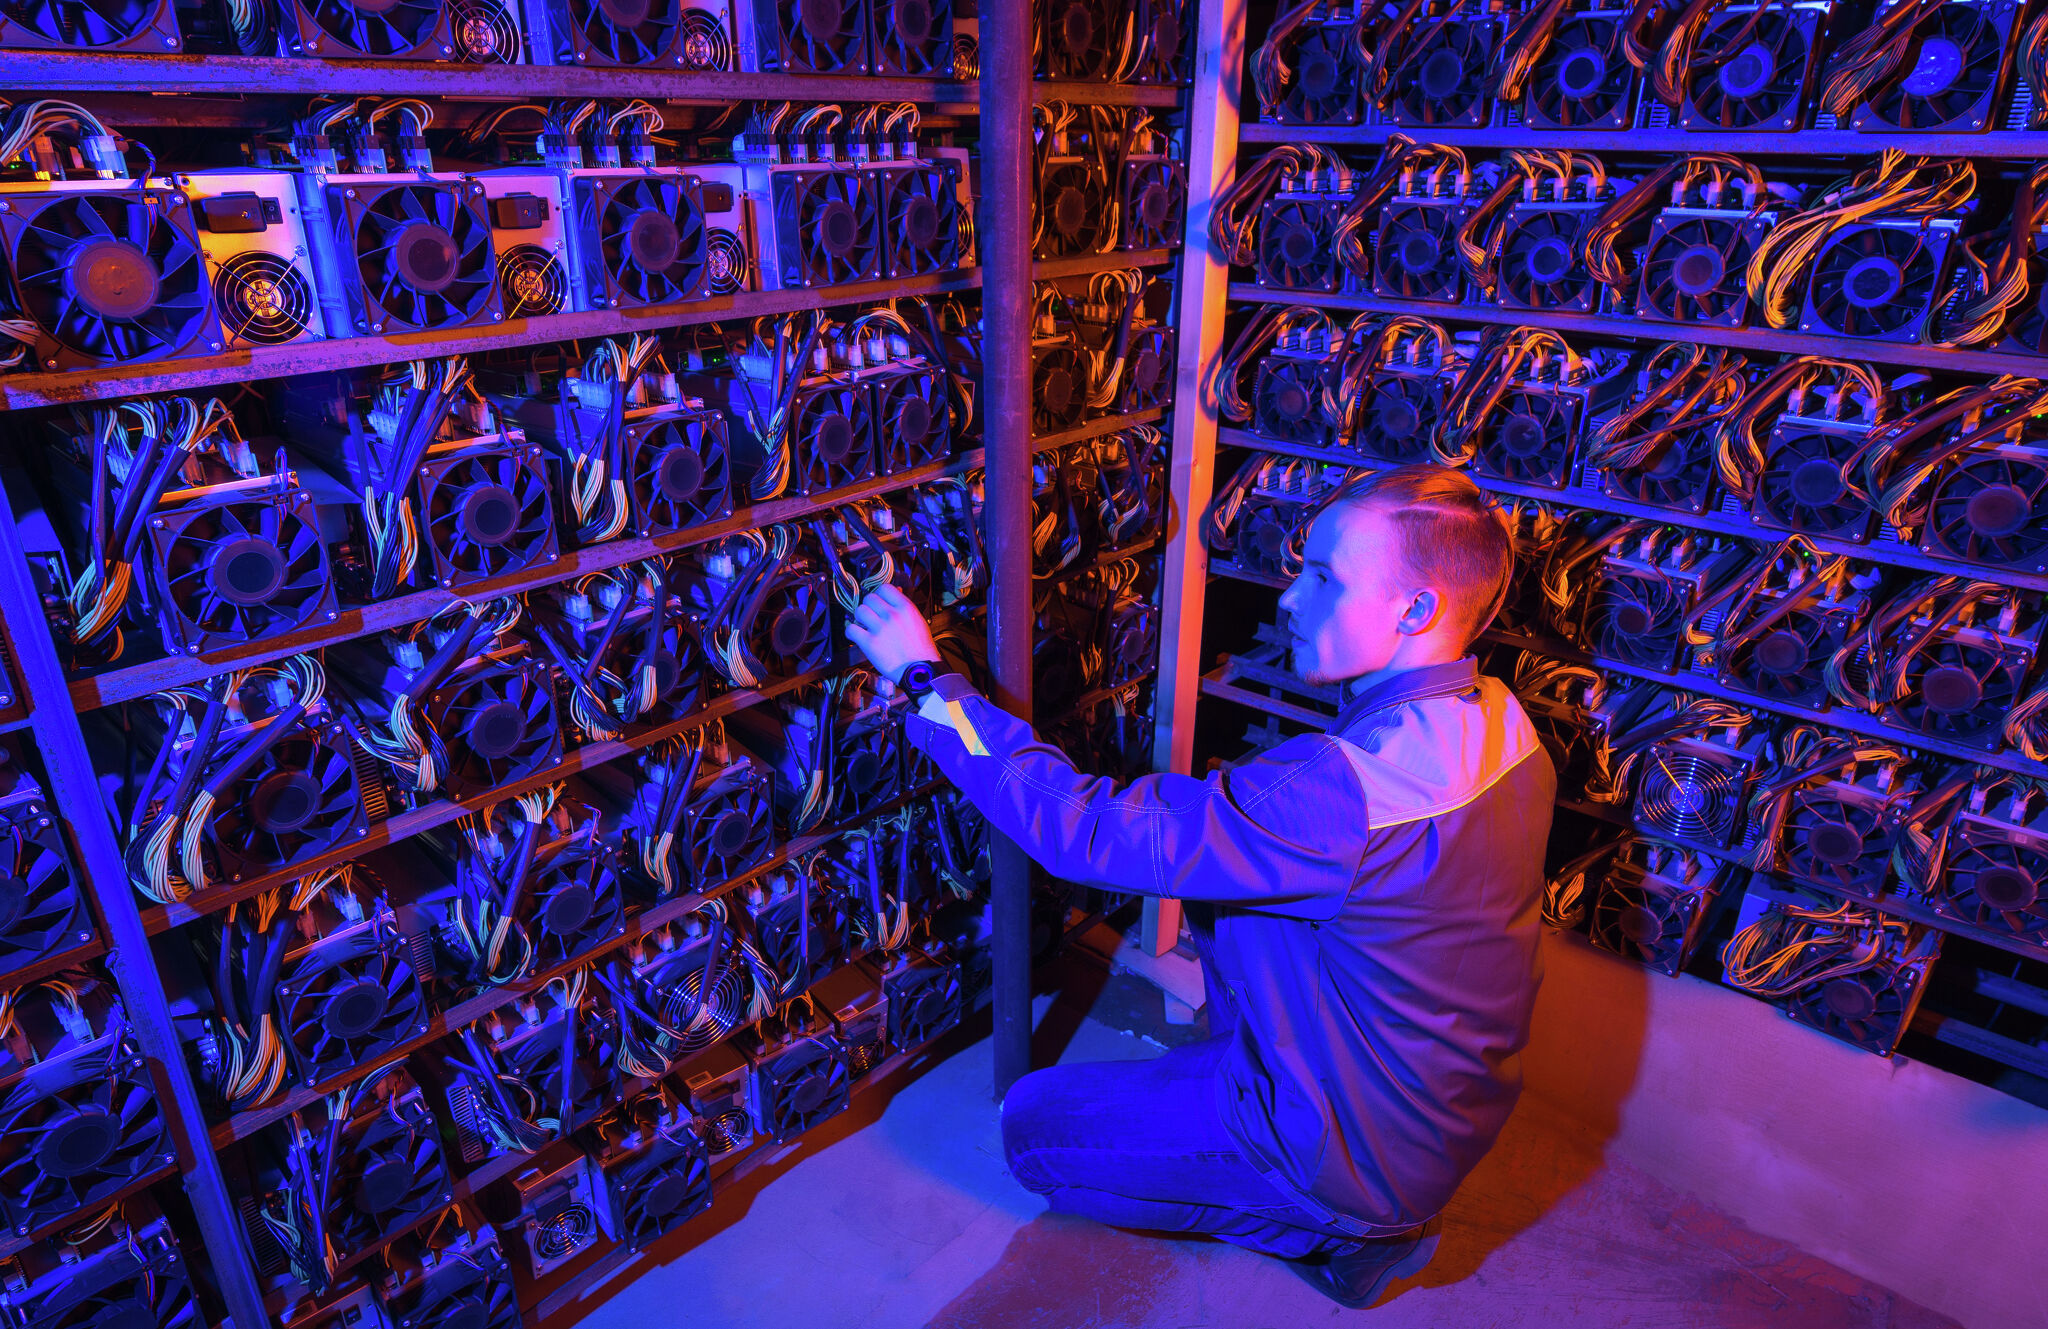 Texas bitcoin mining booms, but sustainability, grid concerns remain